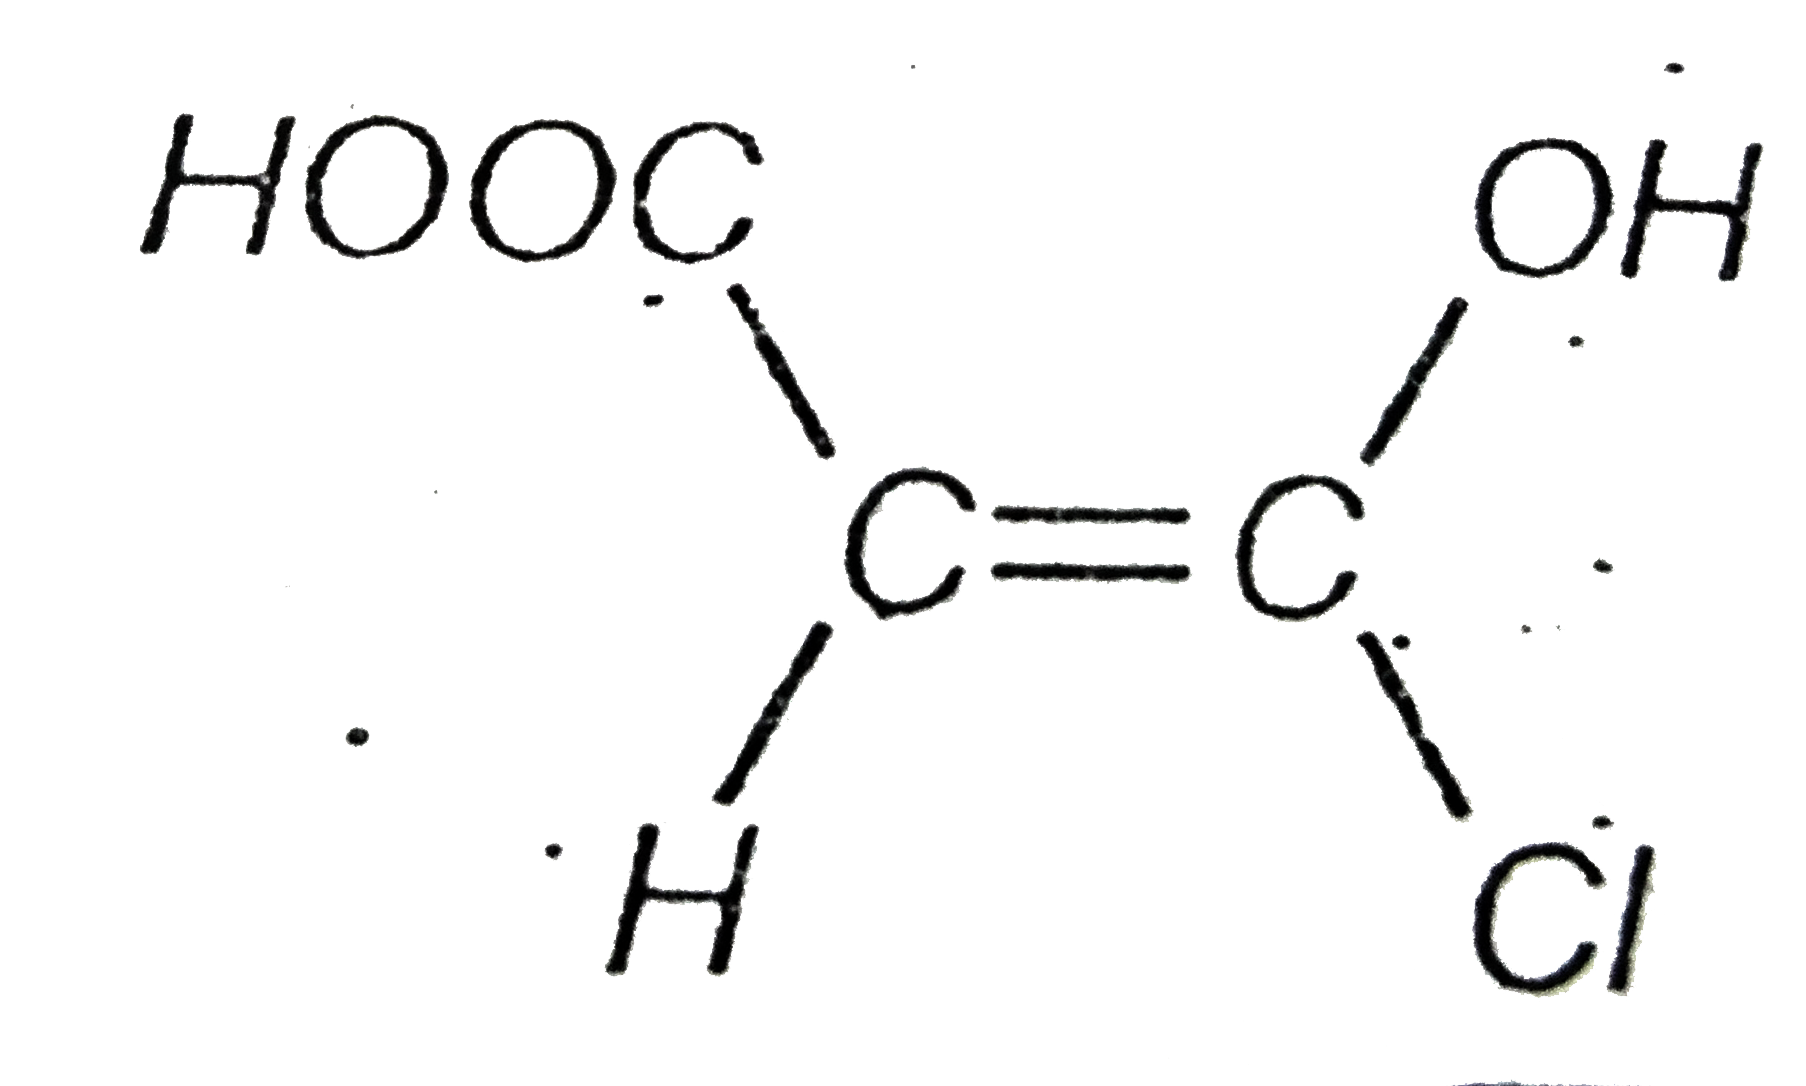 Give the E-Z designation of the following compound